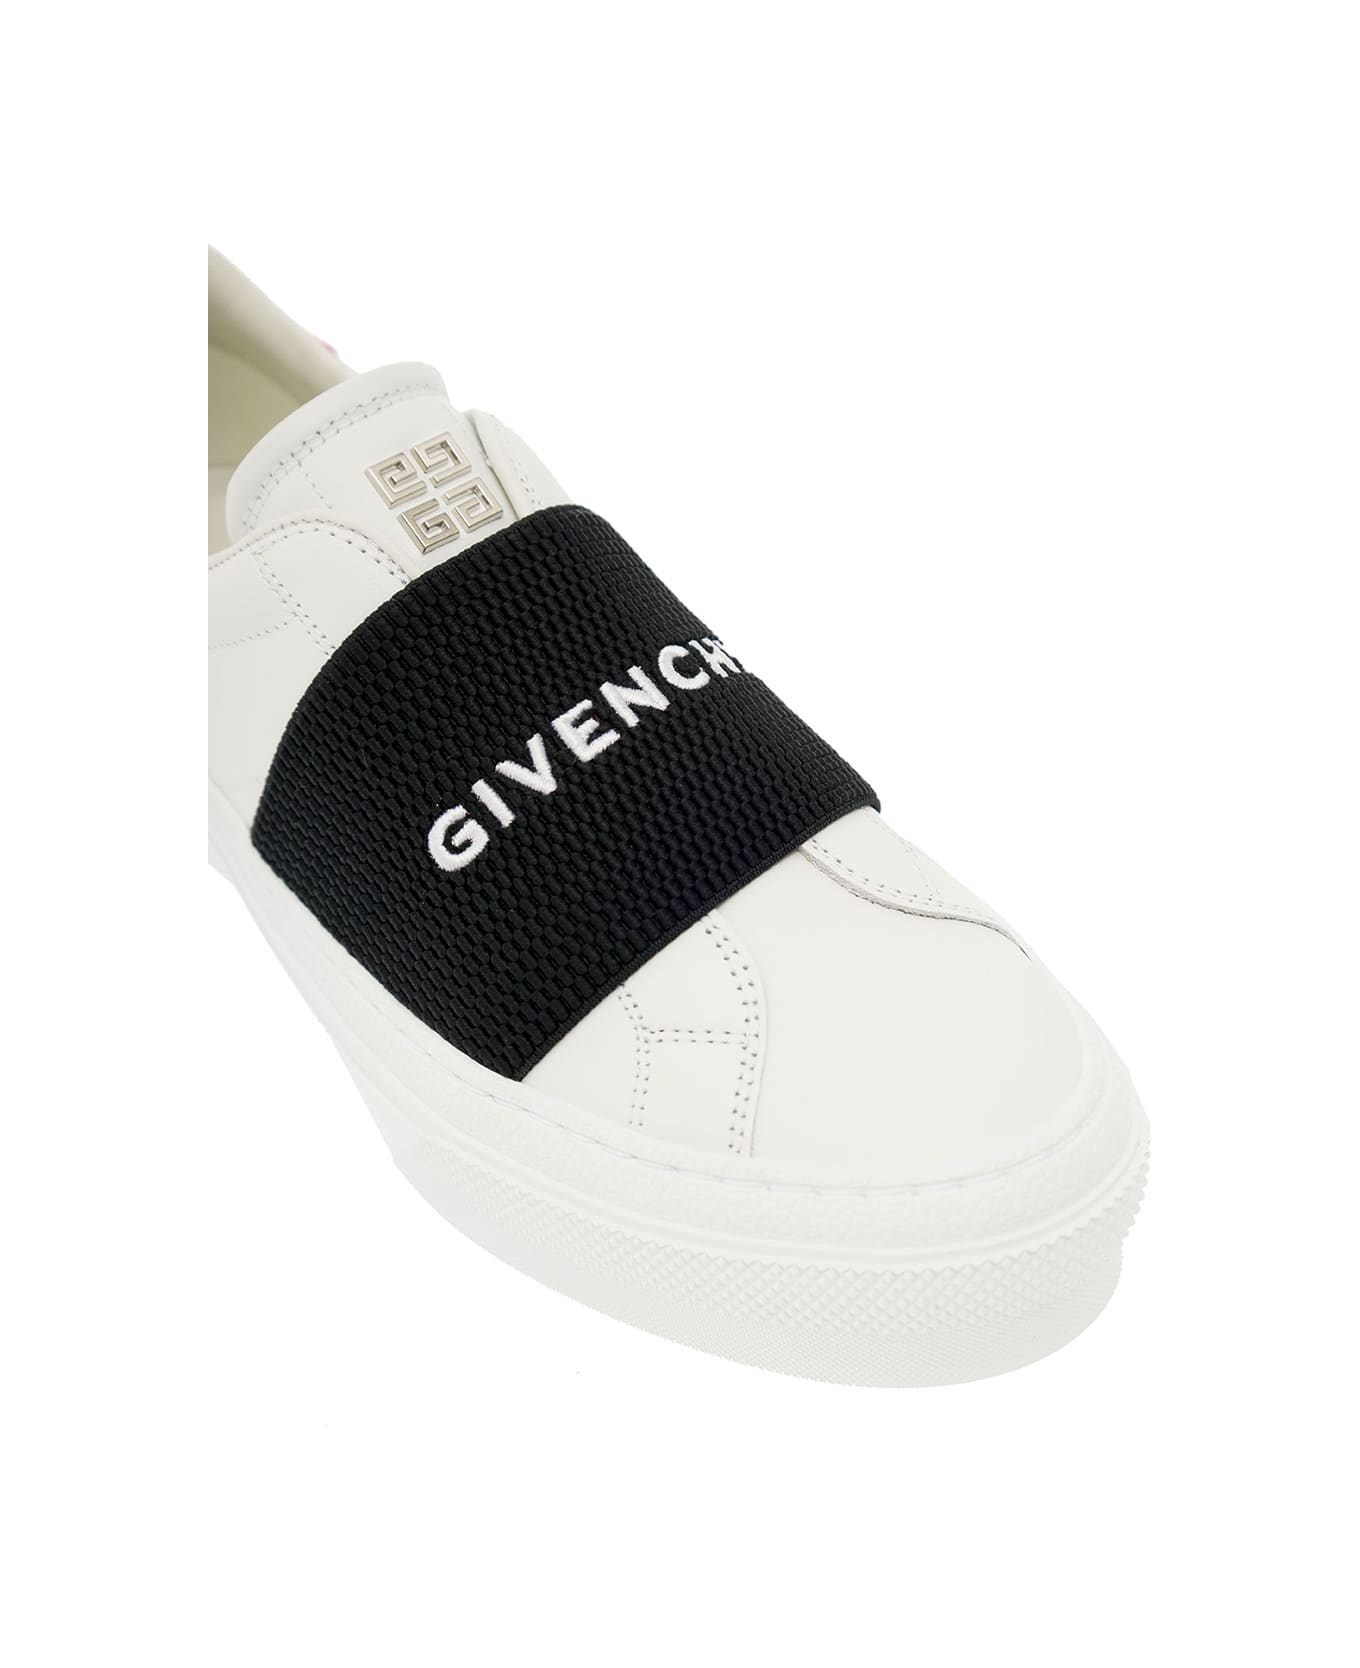 Givenchy Sneakers In White Leather - White Black Pink スニーカー